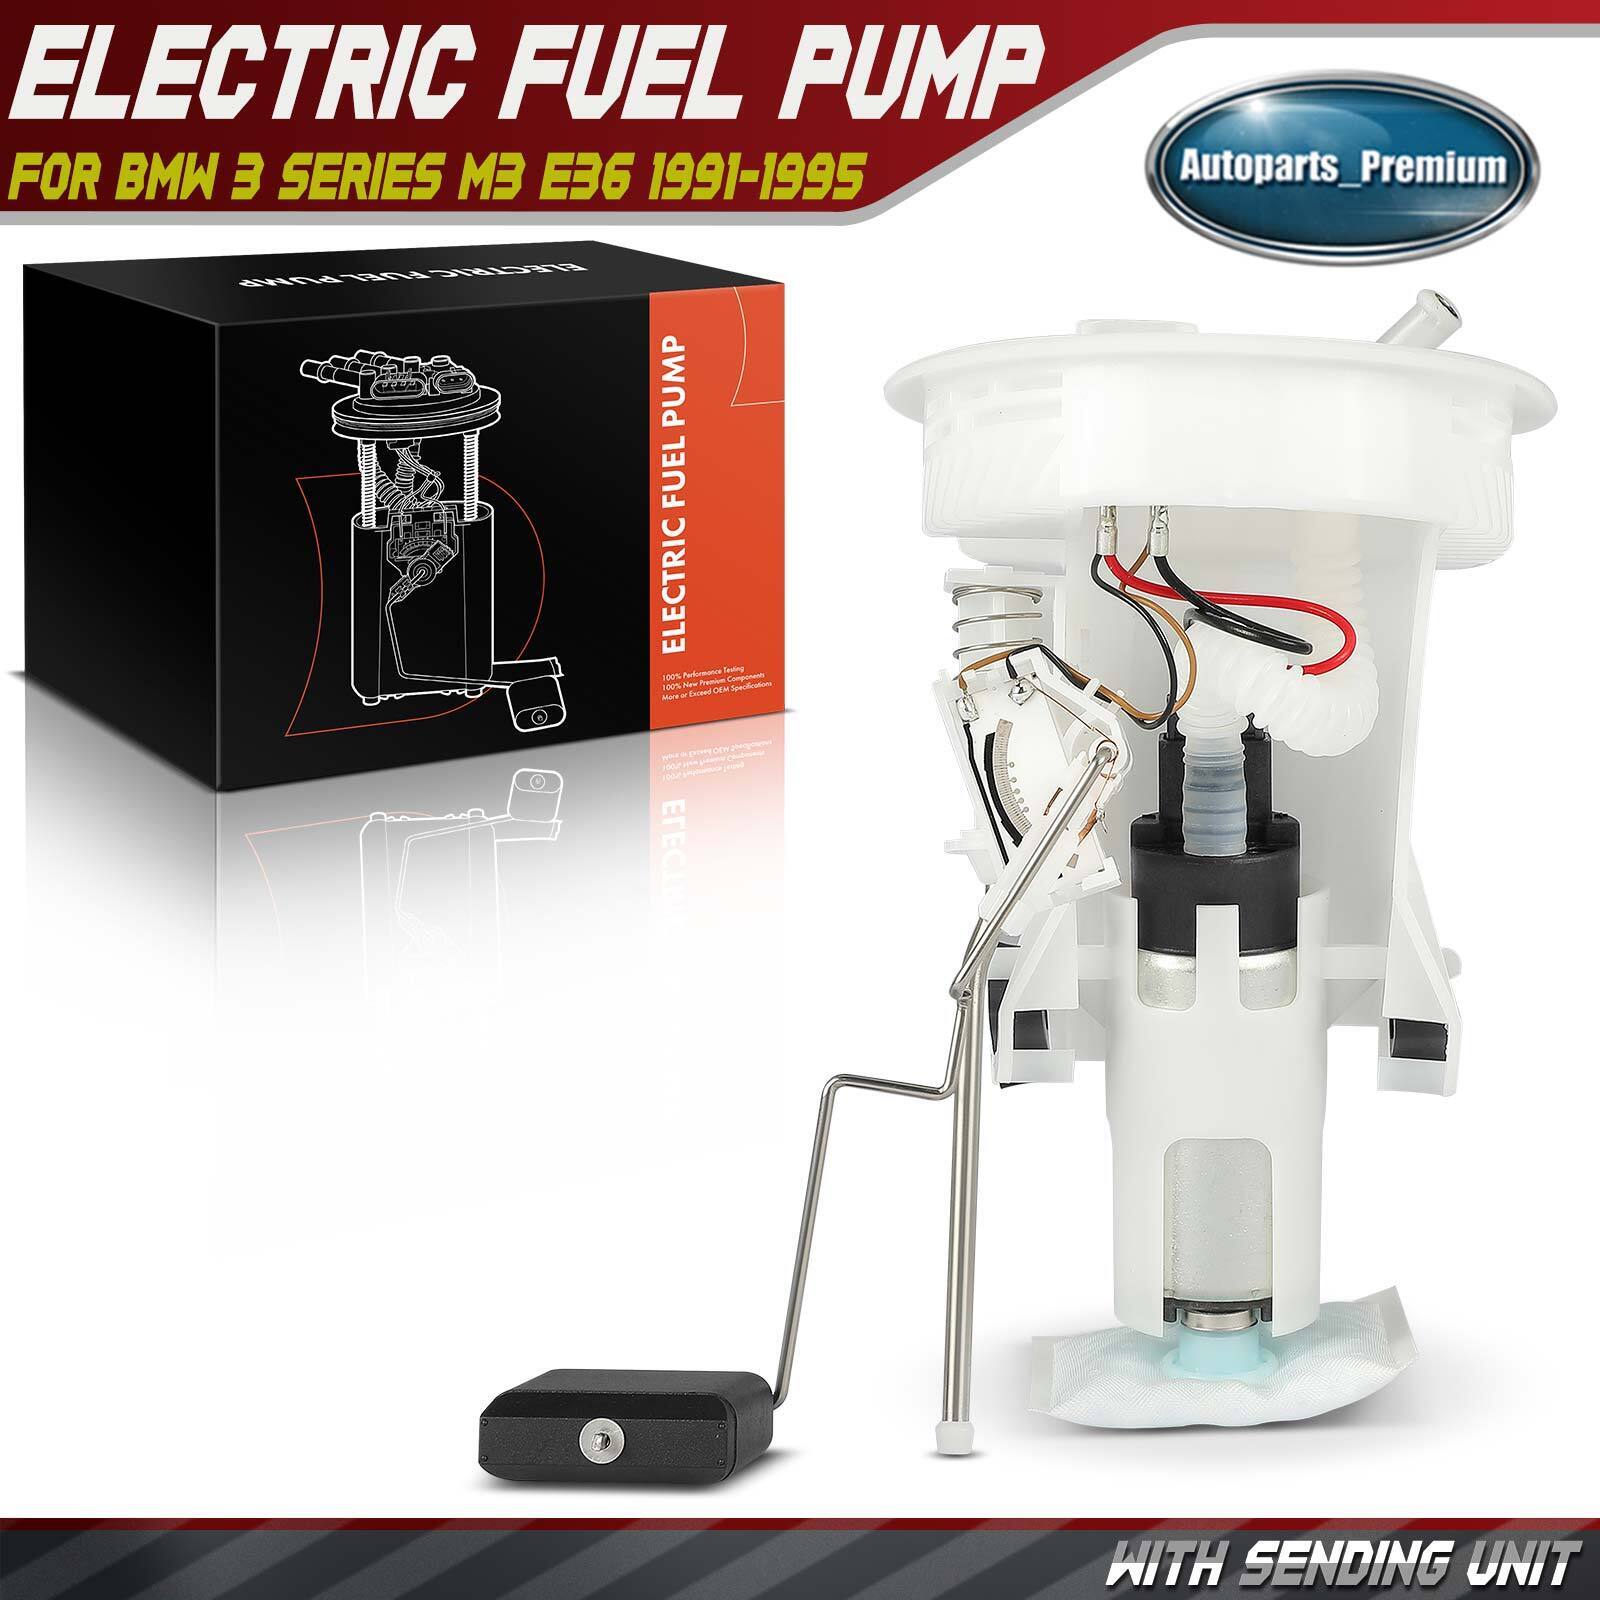 Electric Gas Fuel Pump Assembly for BMW E36 318i 318iS 325i 325is M3 1992-1995